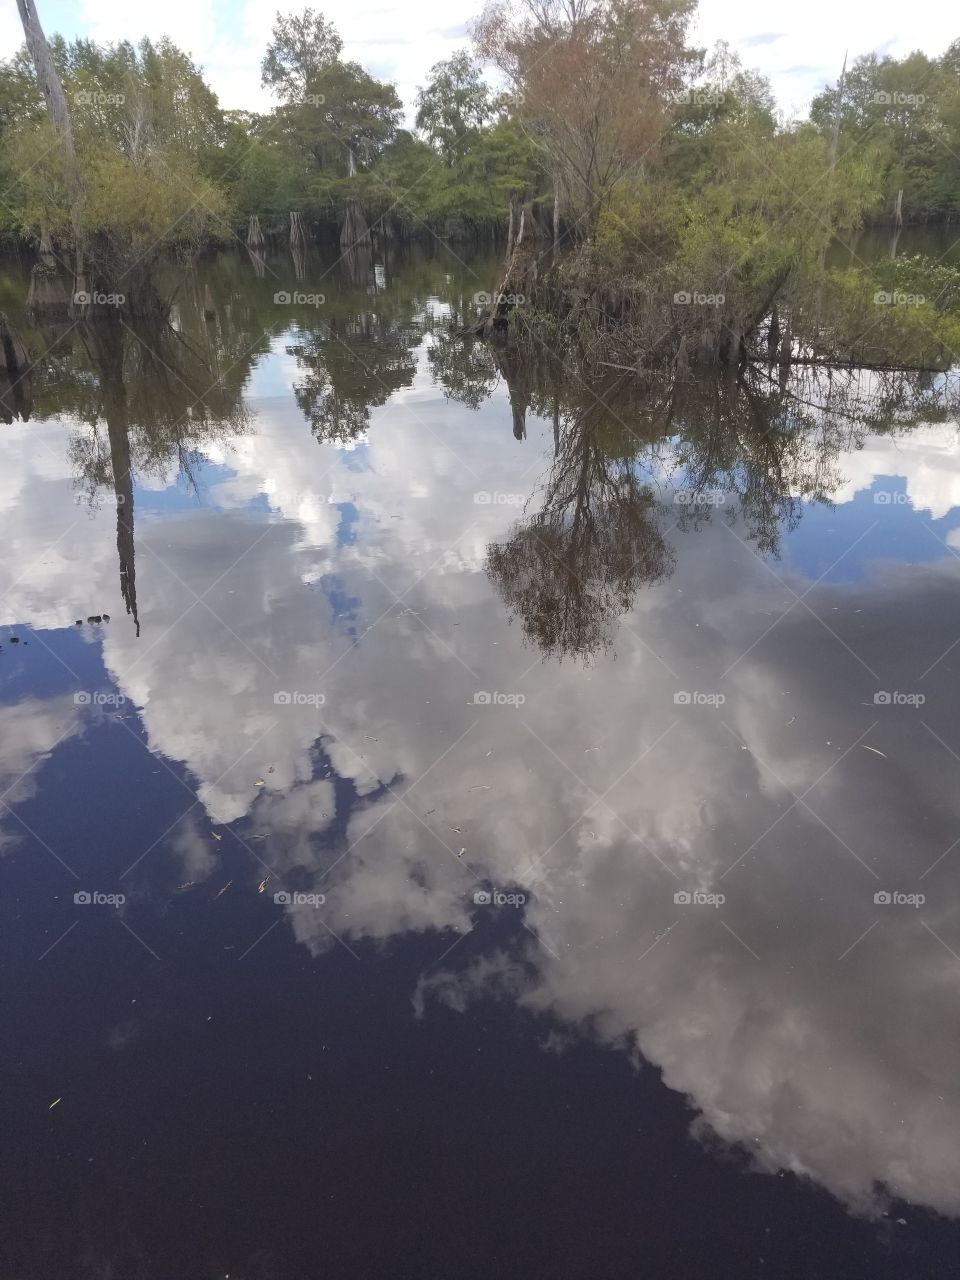 Chipola River in Florida the reflection of the sky on the river